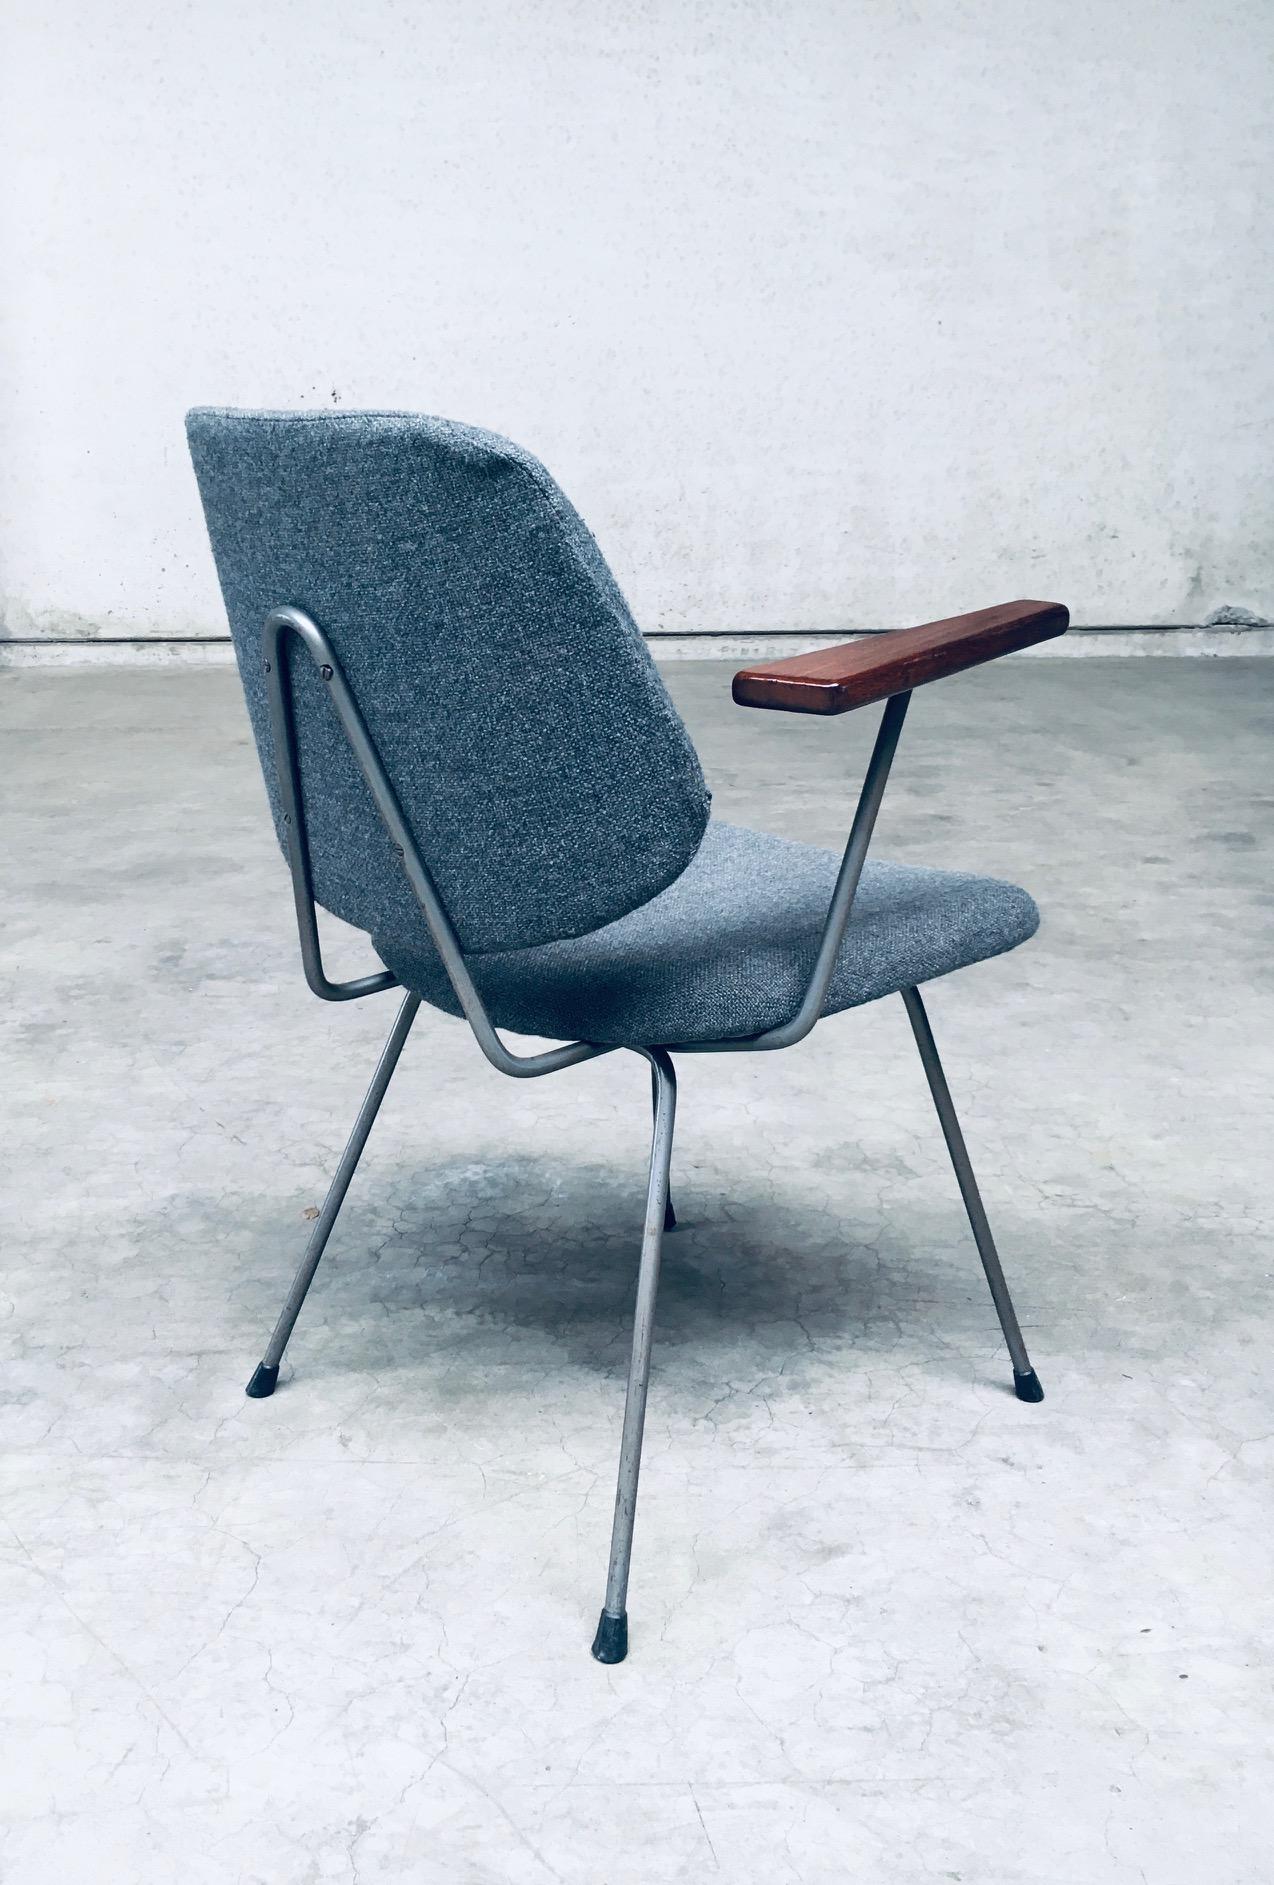 Midcentury Modern Design Office Chair set by Wim Rietveld for Kembo, 1950's For Sale 6